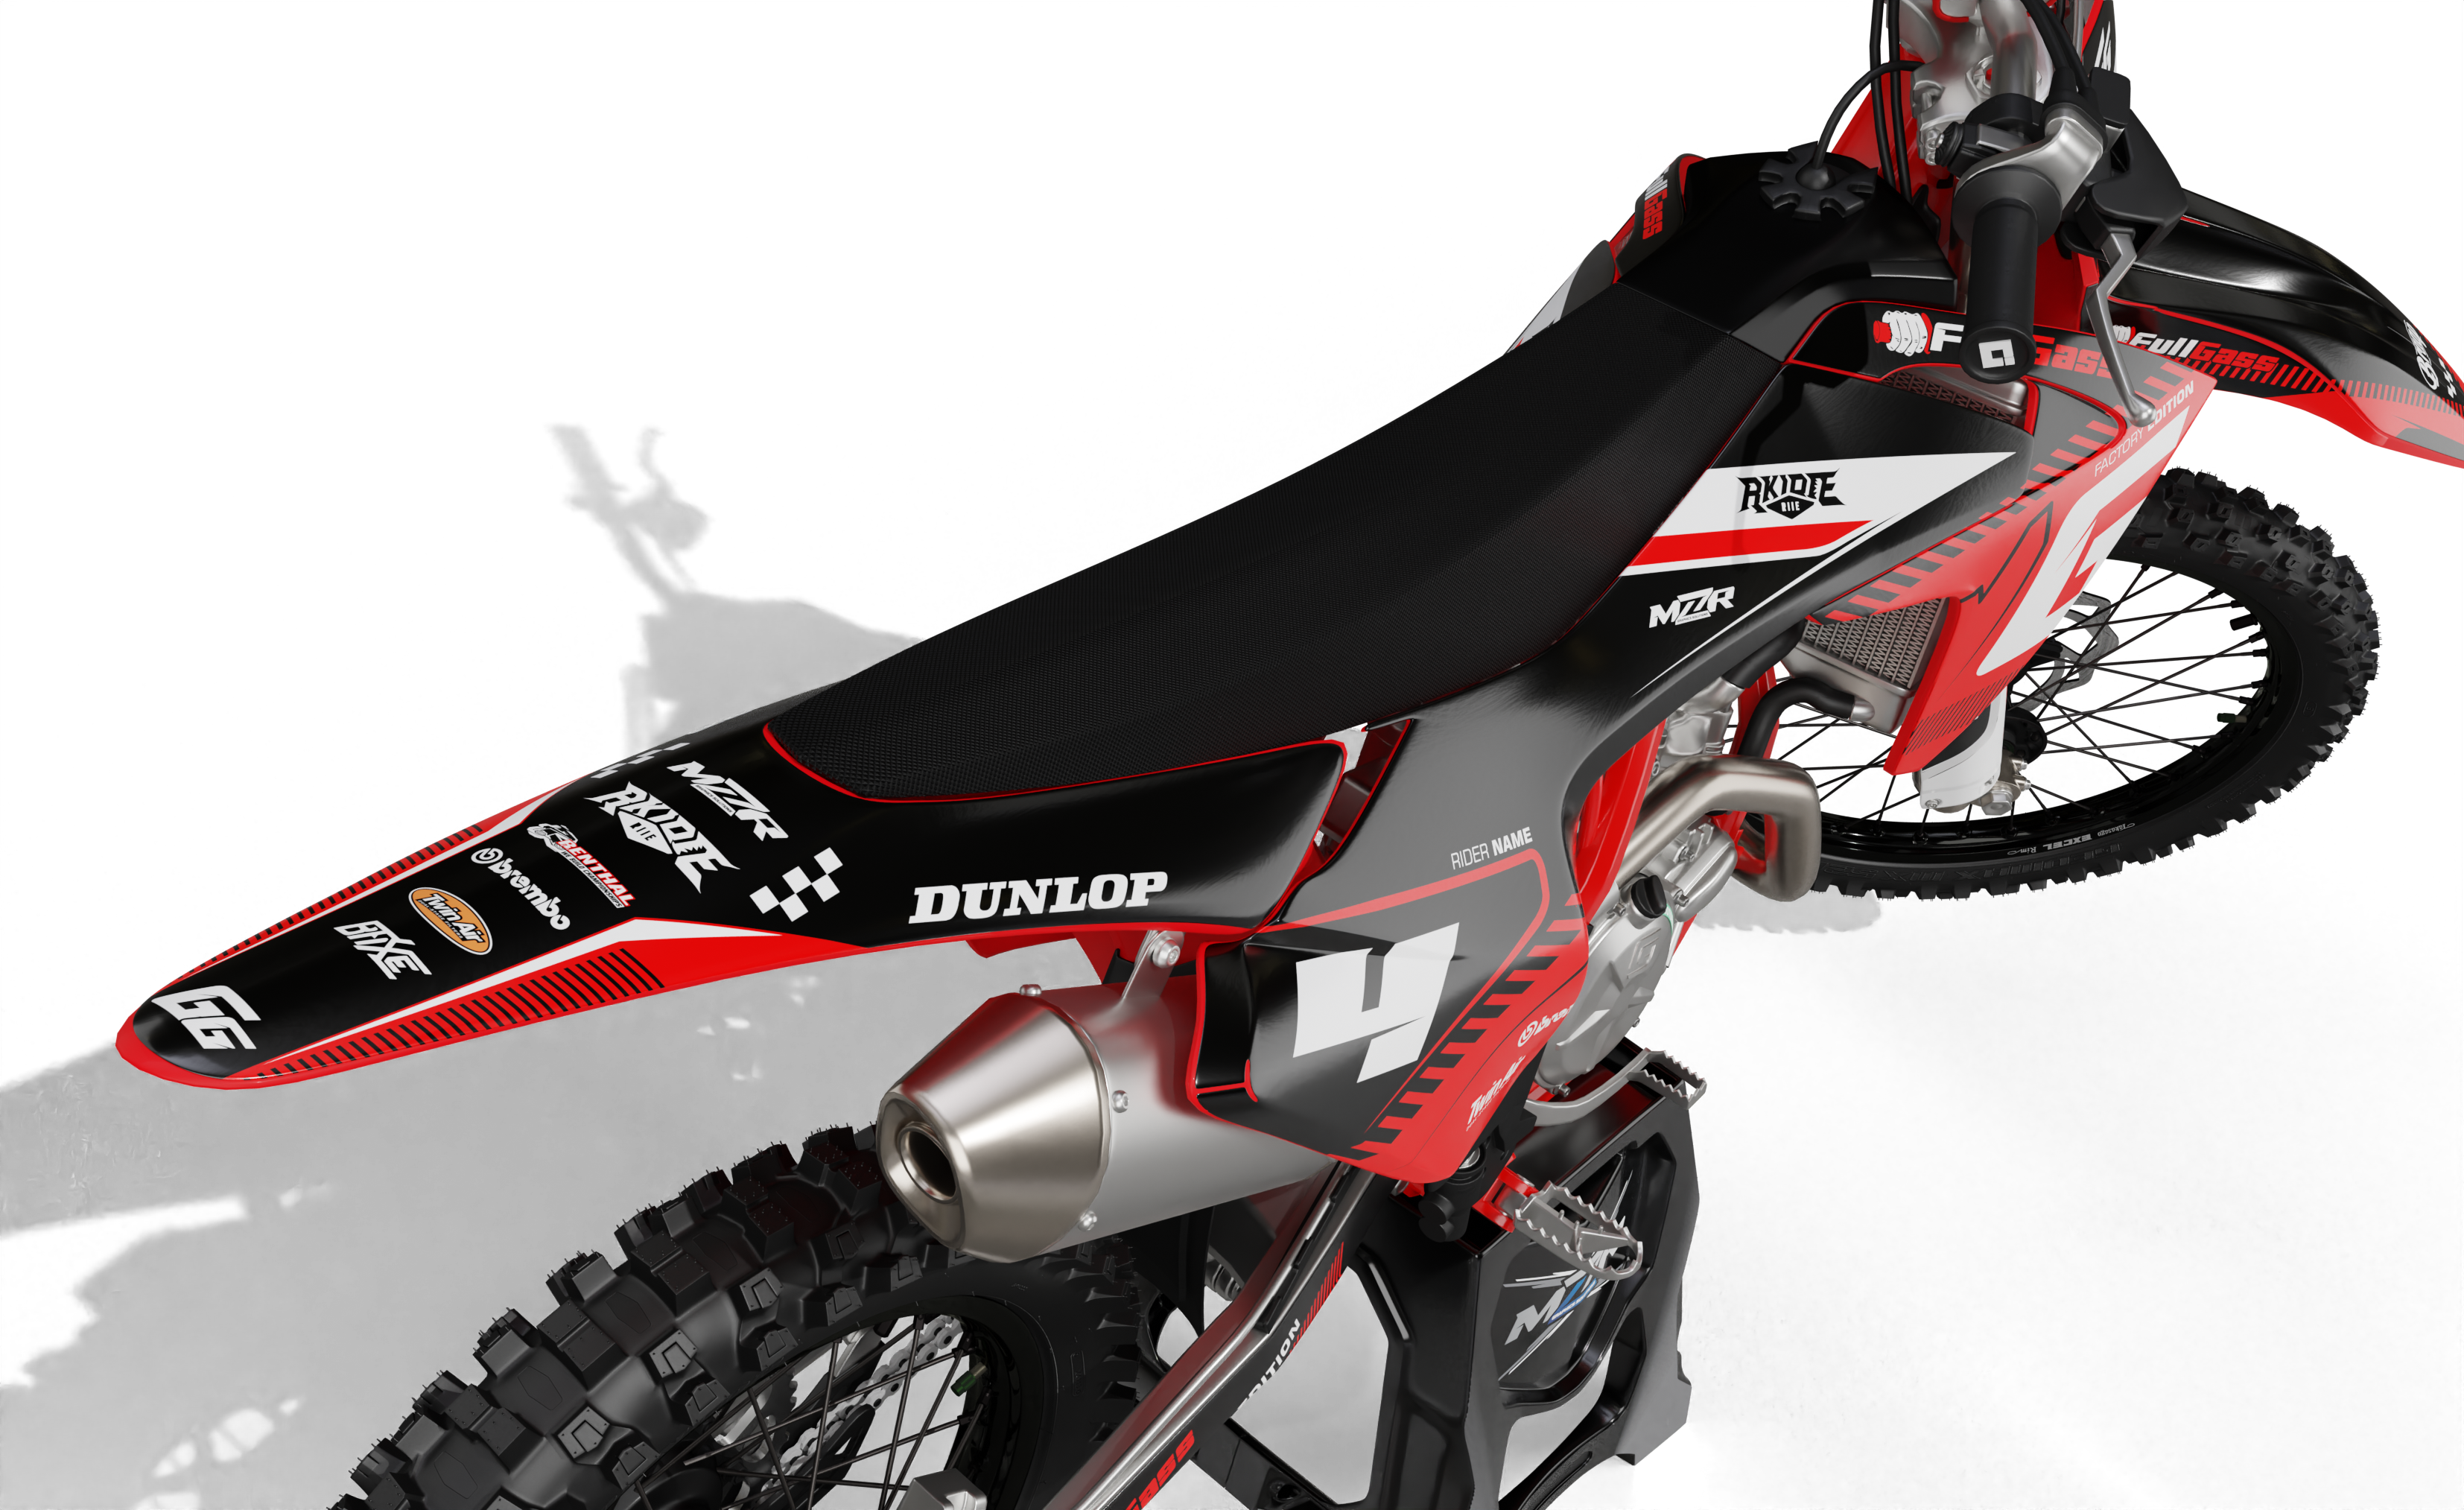 ROCKET graphics kit for GAS GAS bikes